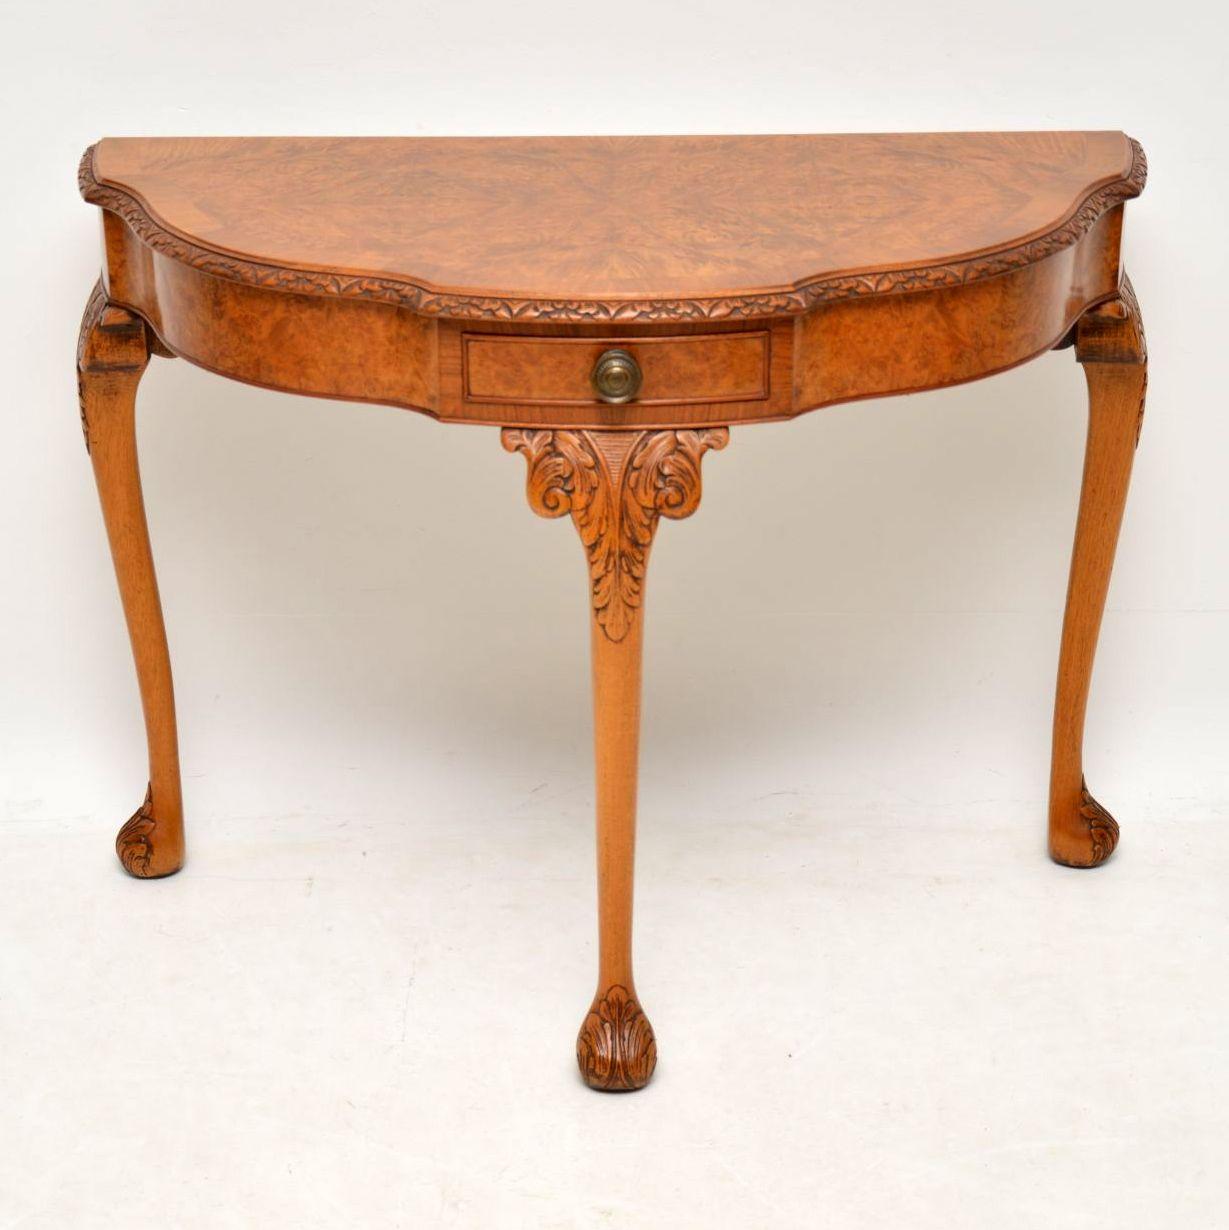 Very impressive well shaped burr walnut console side table in good condition & having a lovely colour. It has a single drawer in the middle, a carved top edge, with more carvings on the legs & feet. This console table is Queen Anne style & dates